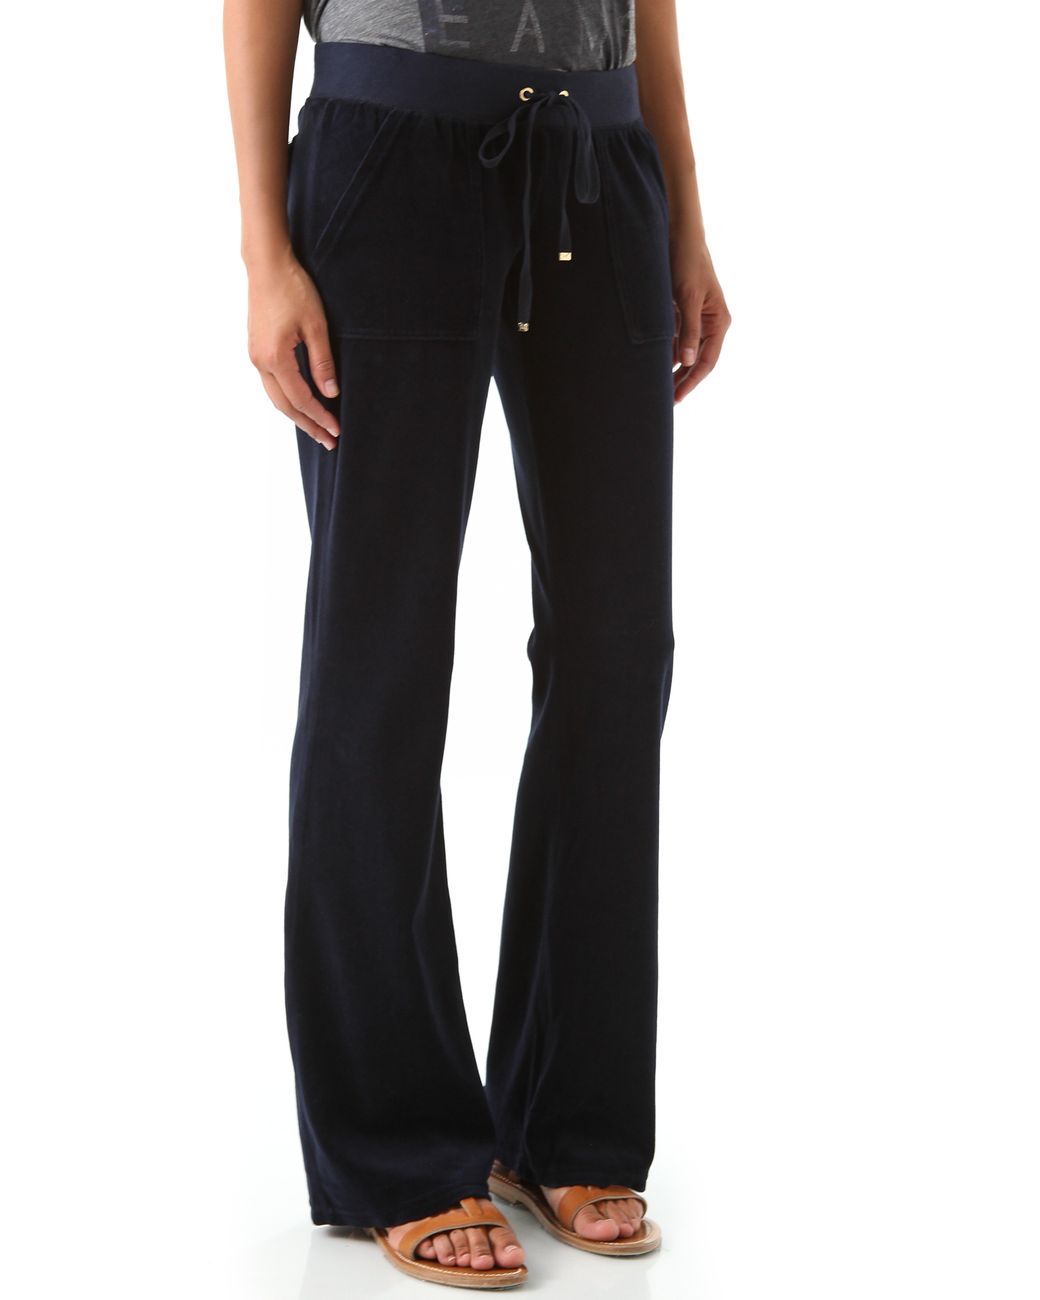 Buy Juicy Couture Velour Track Pants Online India  Ubuy